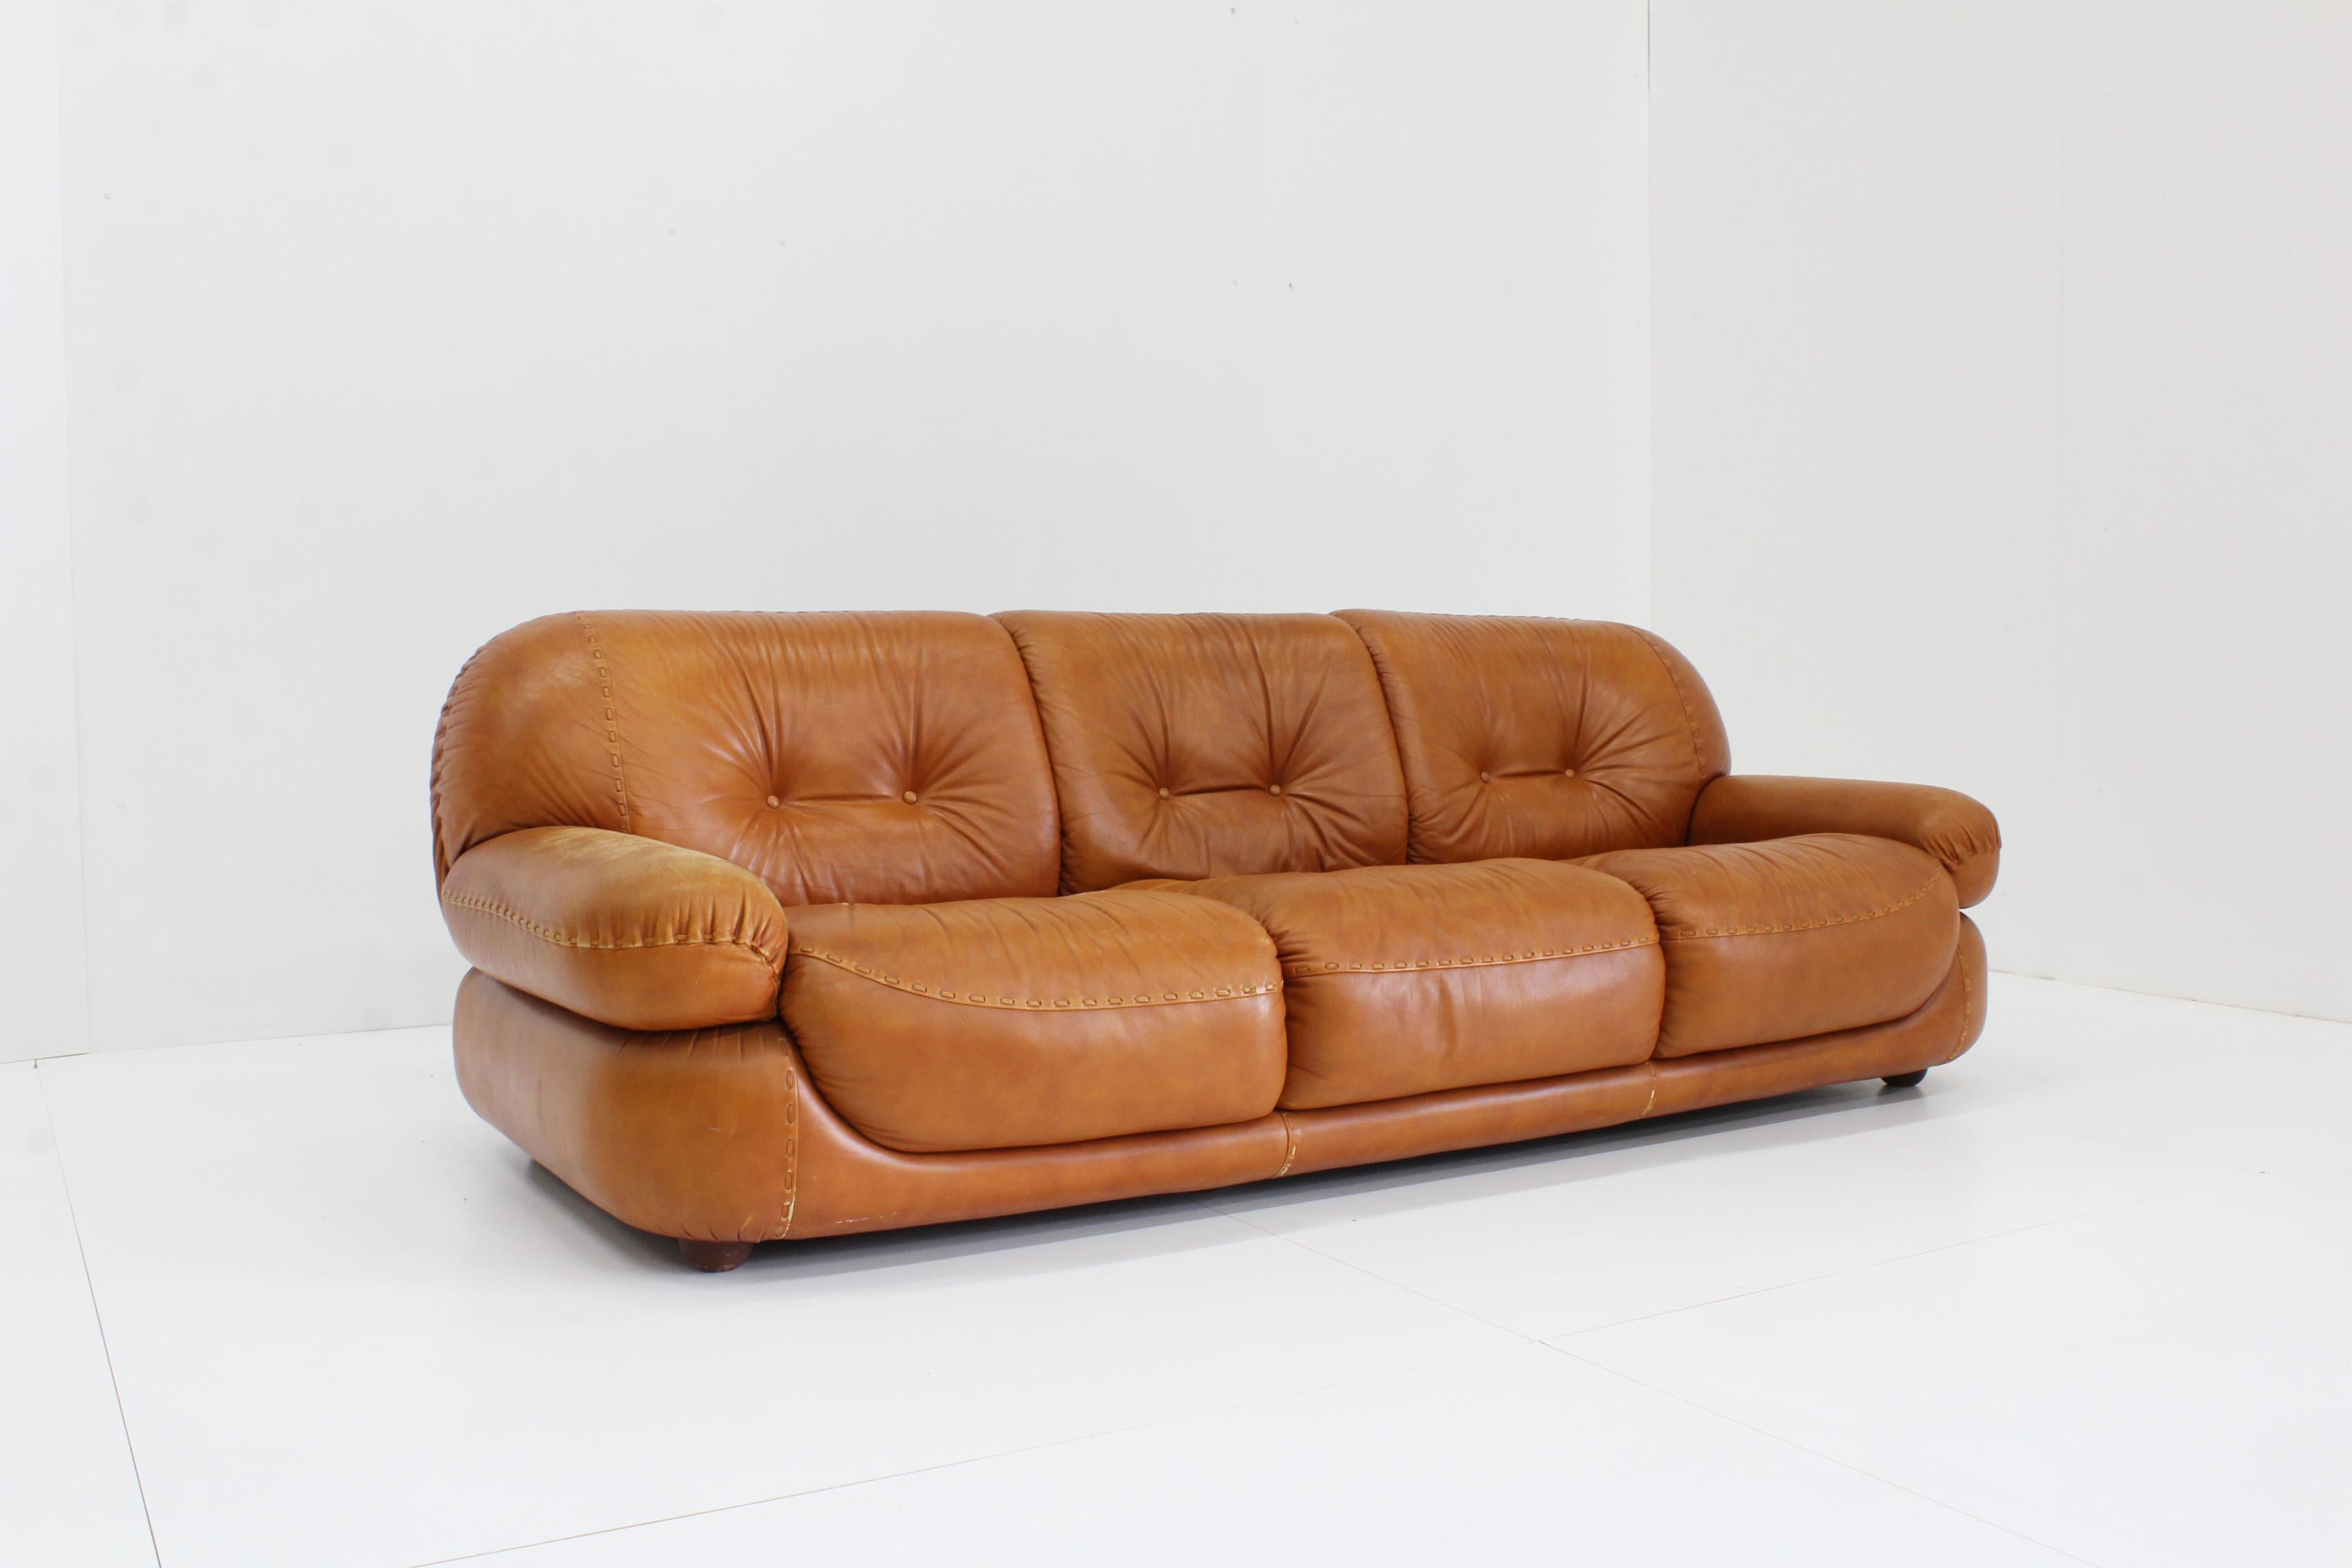 Italian cognac Leather 3 seater sofa designed by Sapporo for Mobil Girgi in the 1970s. The sofa is extremly comfortable and well designed, high quality italian design. Original cognac leather upholstery, beautiful patina. The sofa has a very good